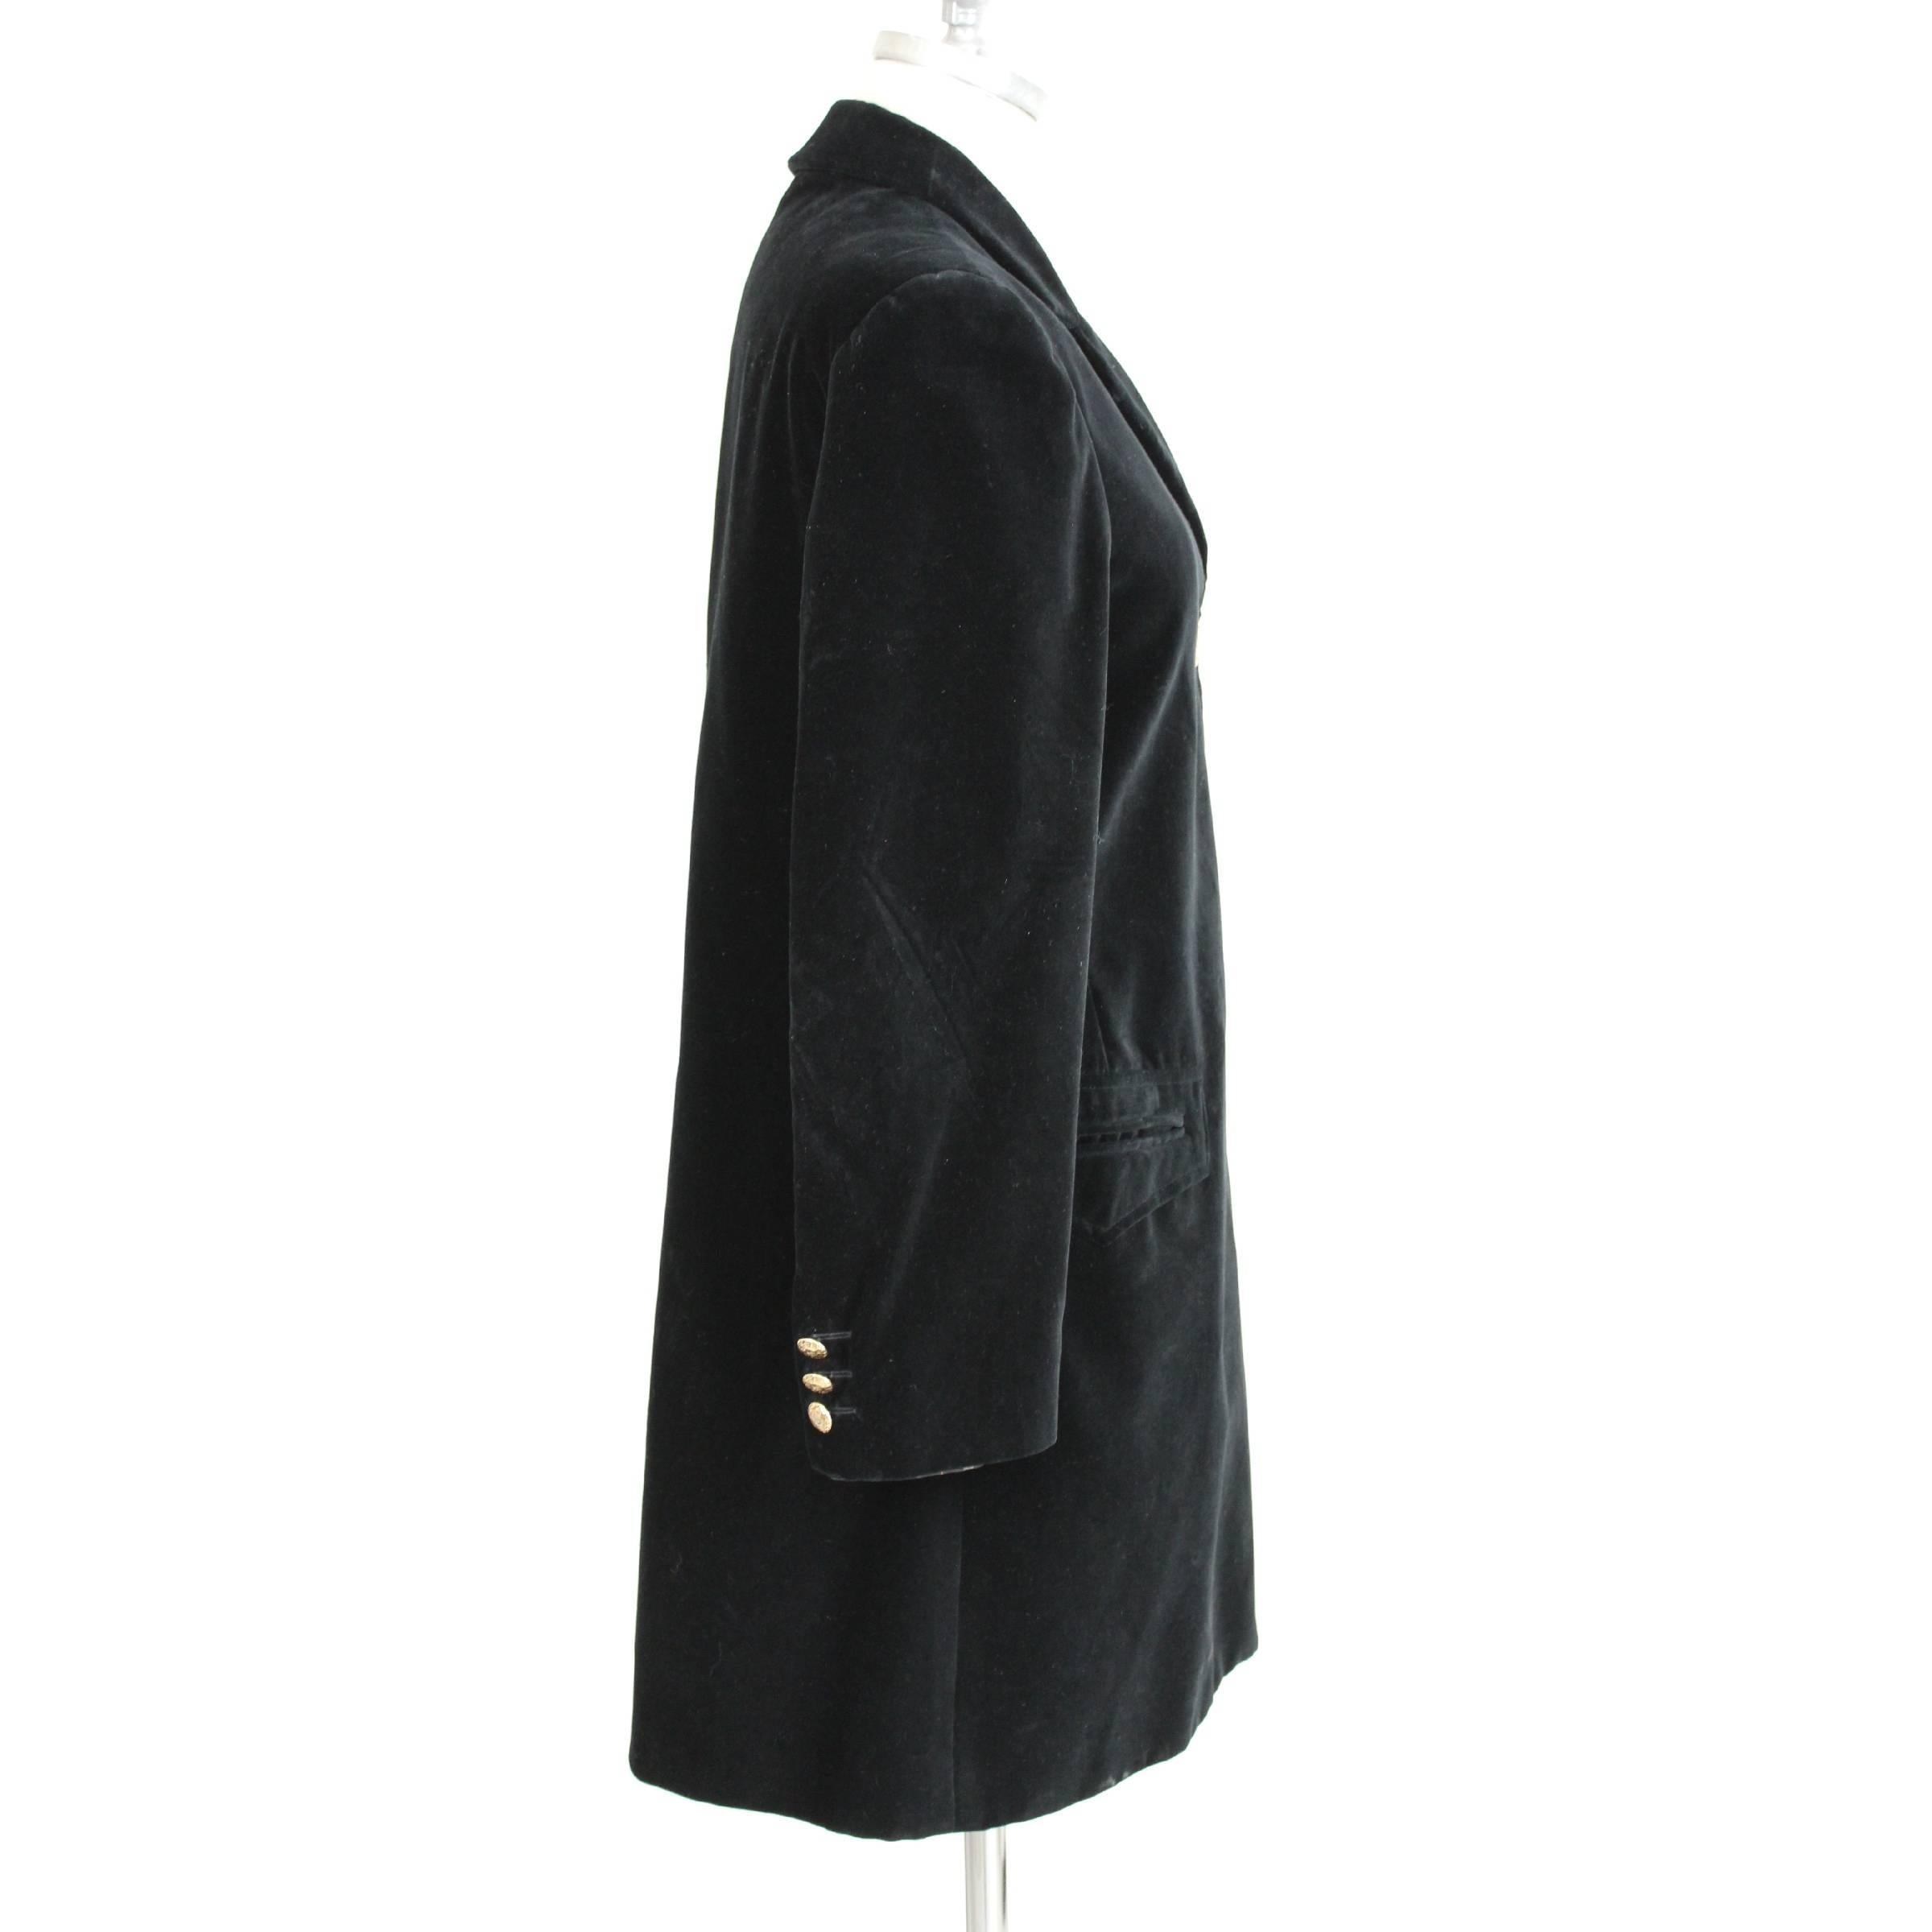 Byblos Cape Poncho Black Velvety Cotton Italian Coat, 1980s In Excellent Condition For Sale In Brindisi, IT